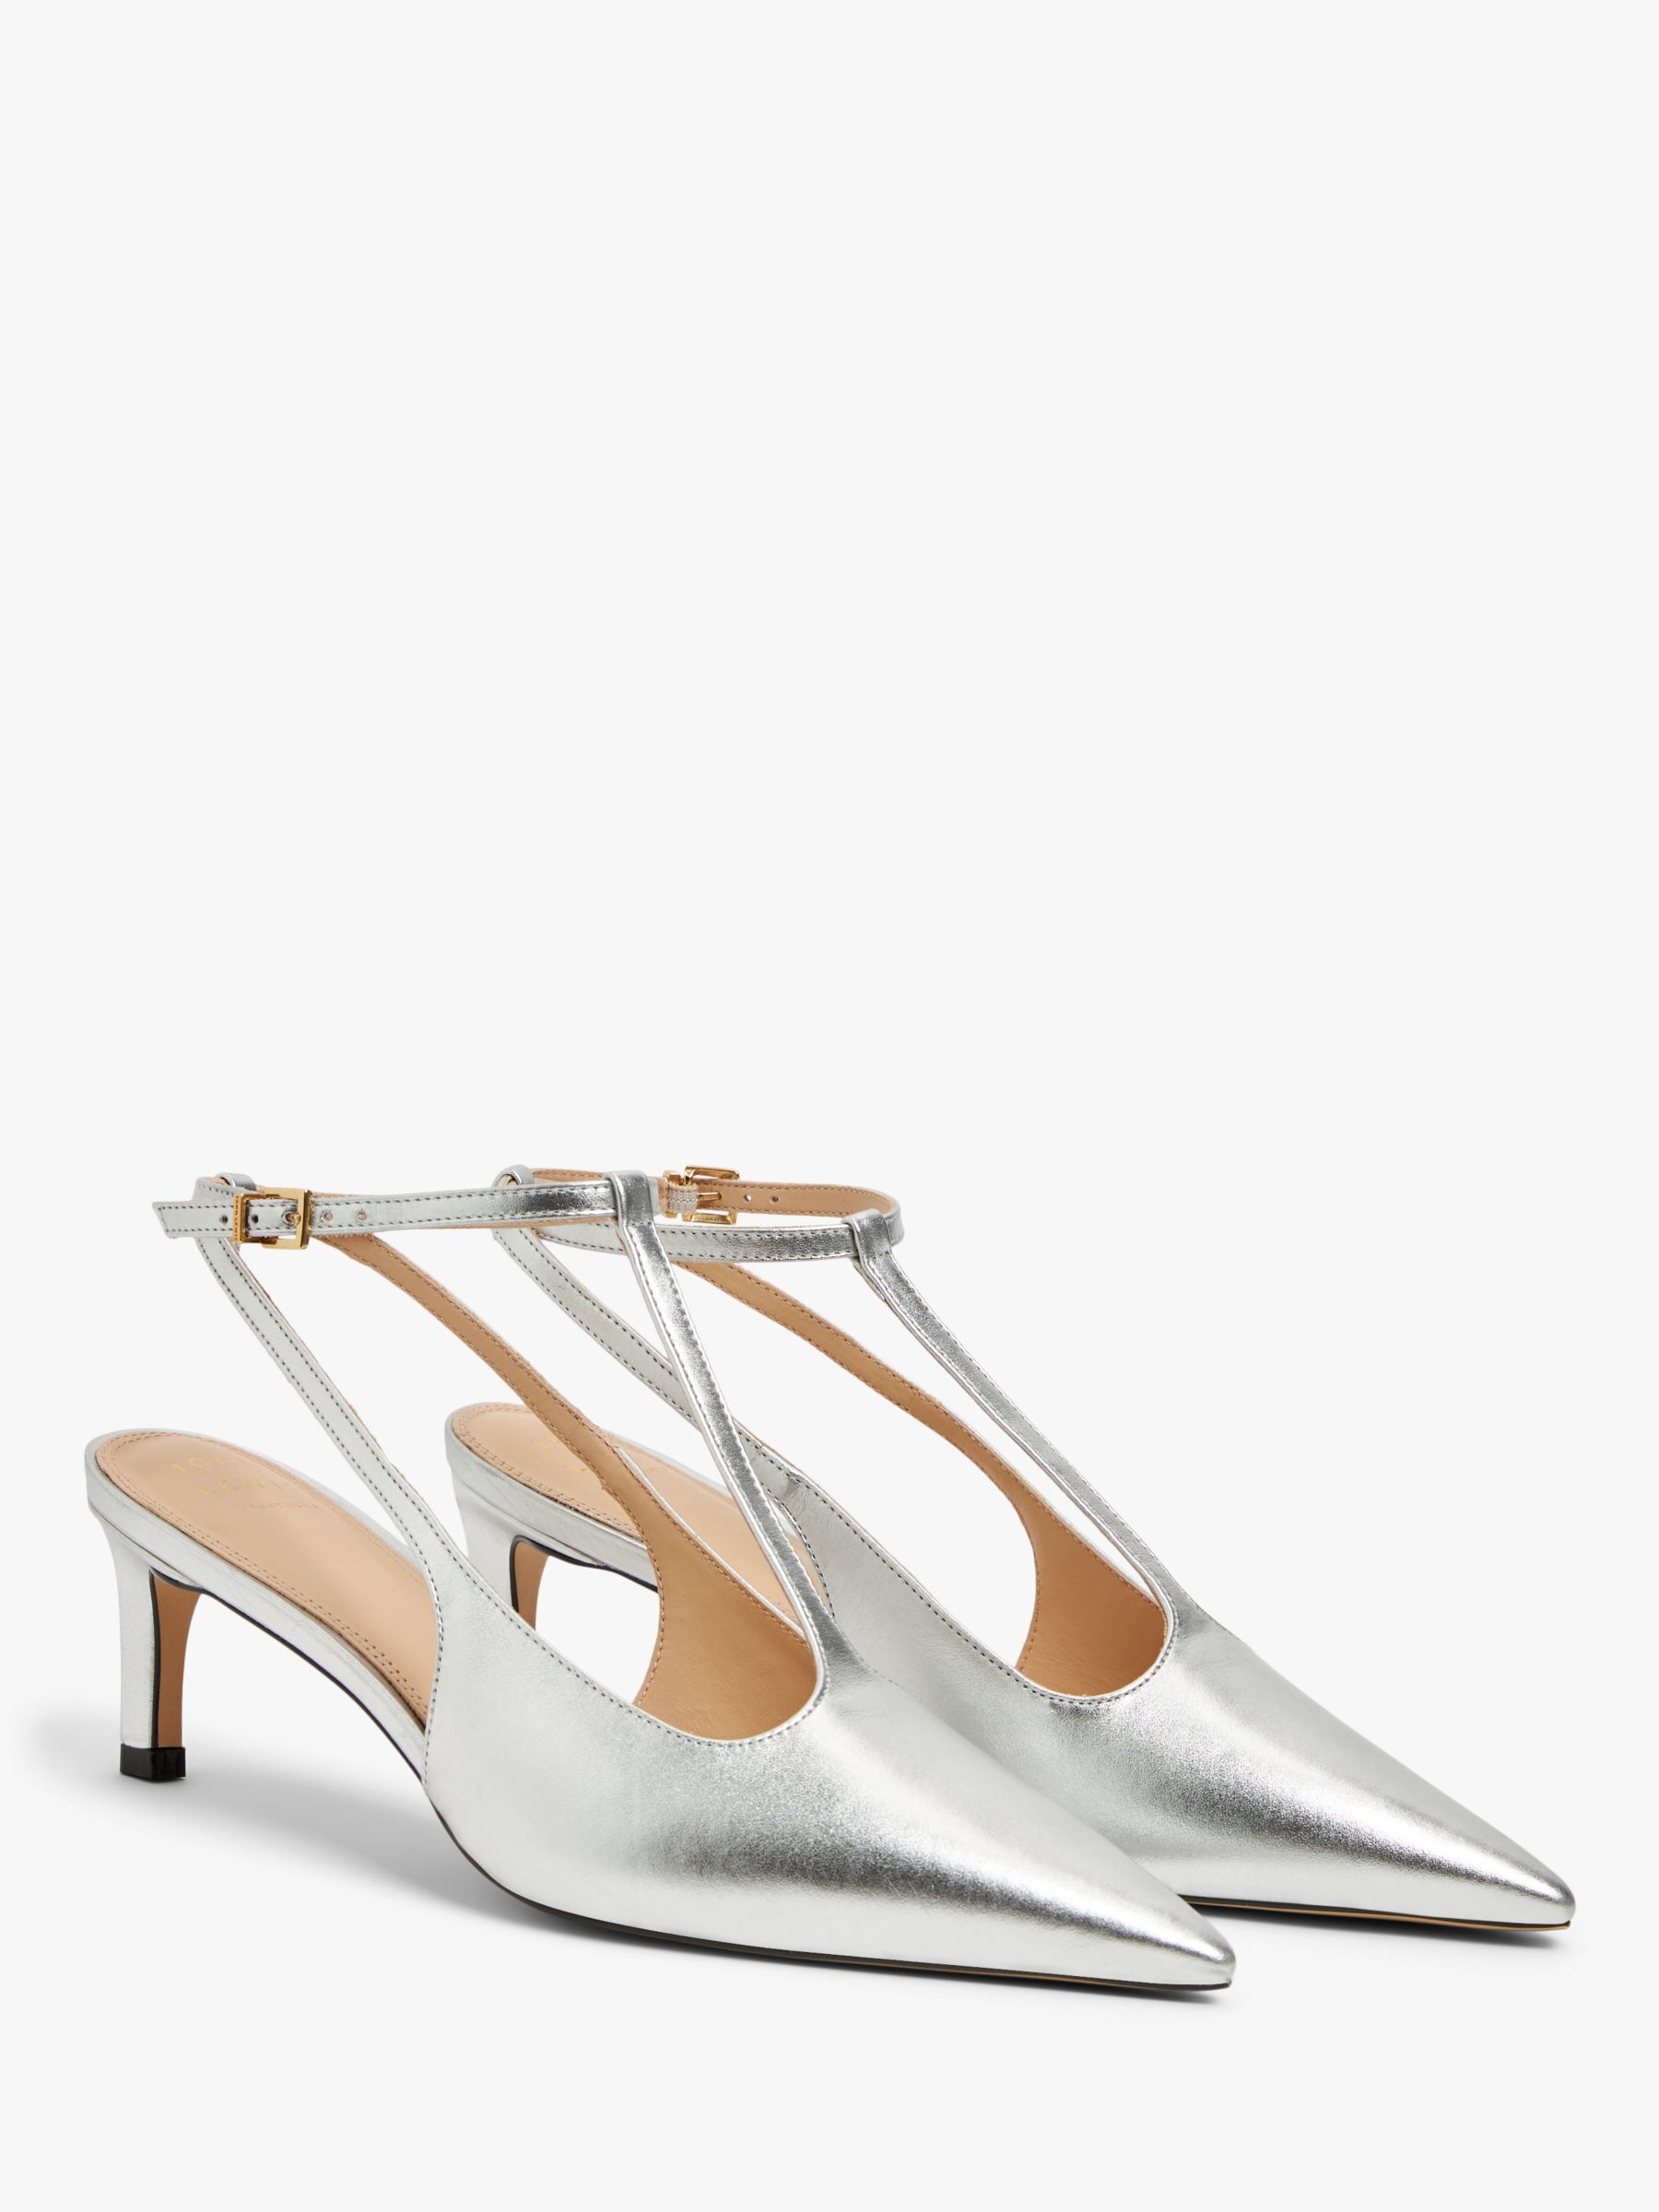 John Lewis Brynn Leather T-Bar Mid Heel Open Court Shoes, Silver, 8